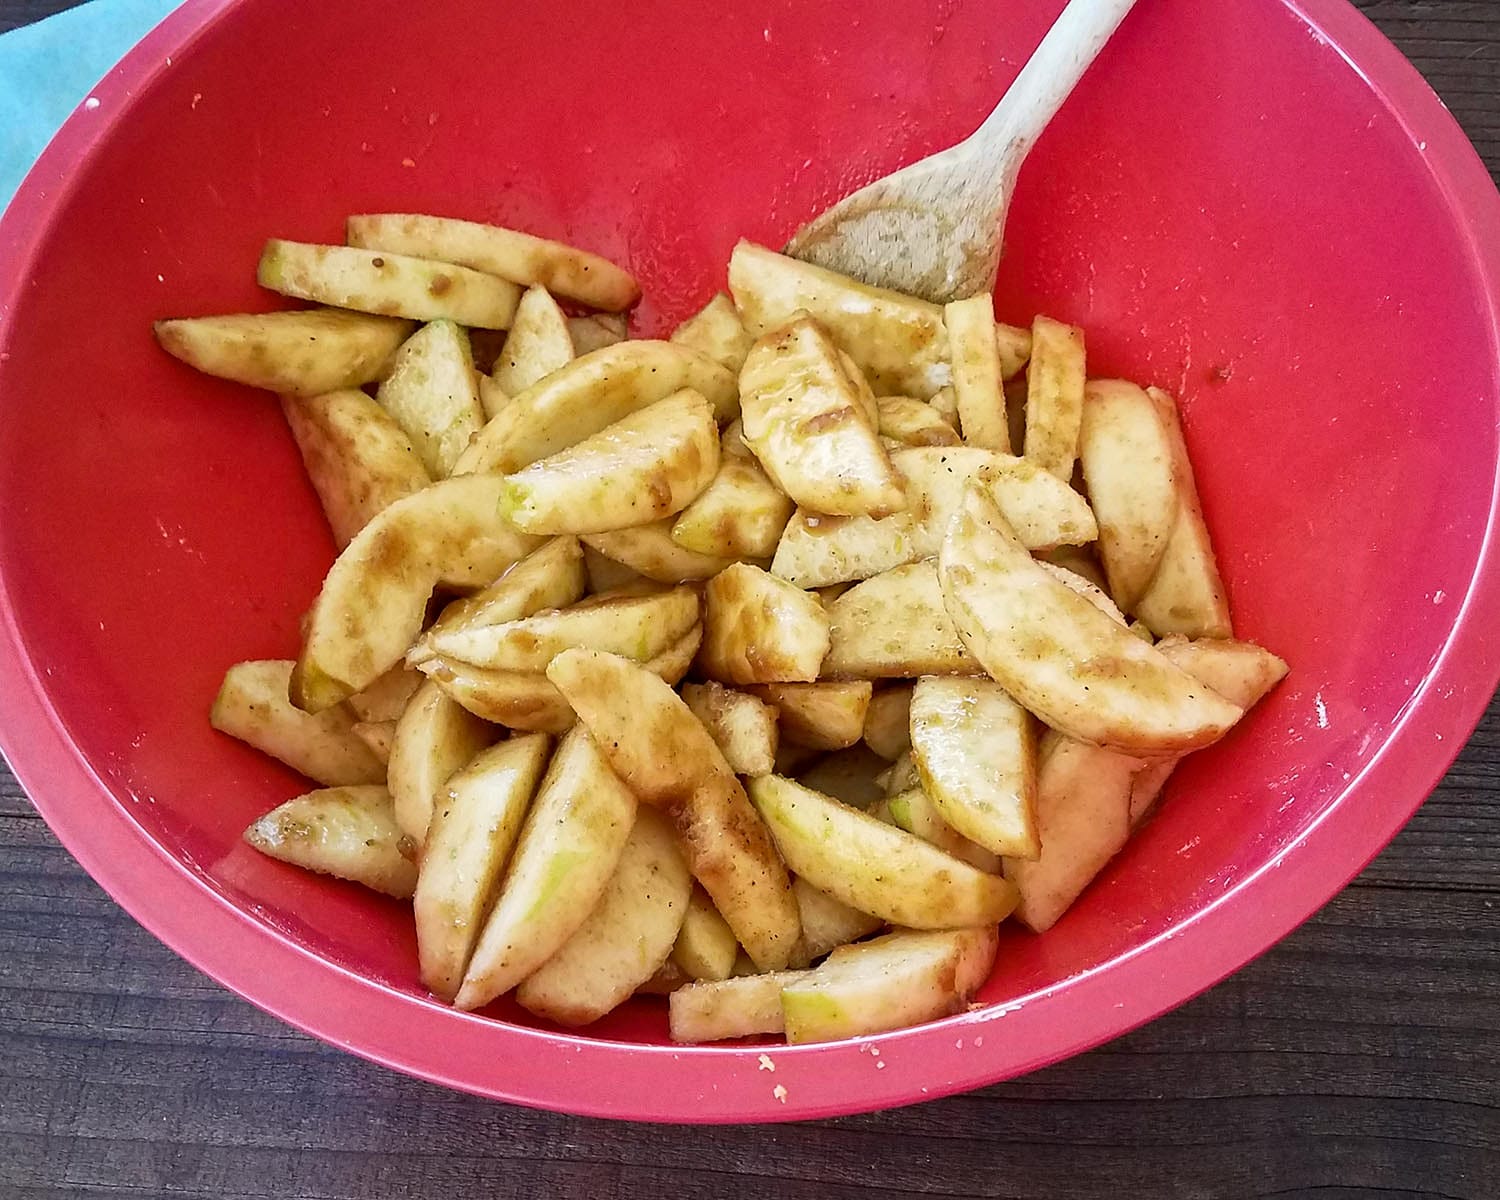 sliced apples with brown sugar and nutmeg in a red bowl